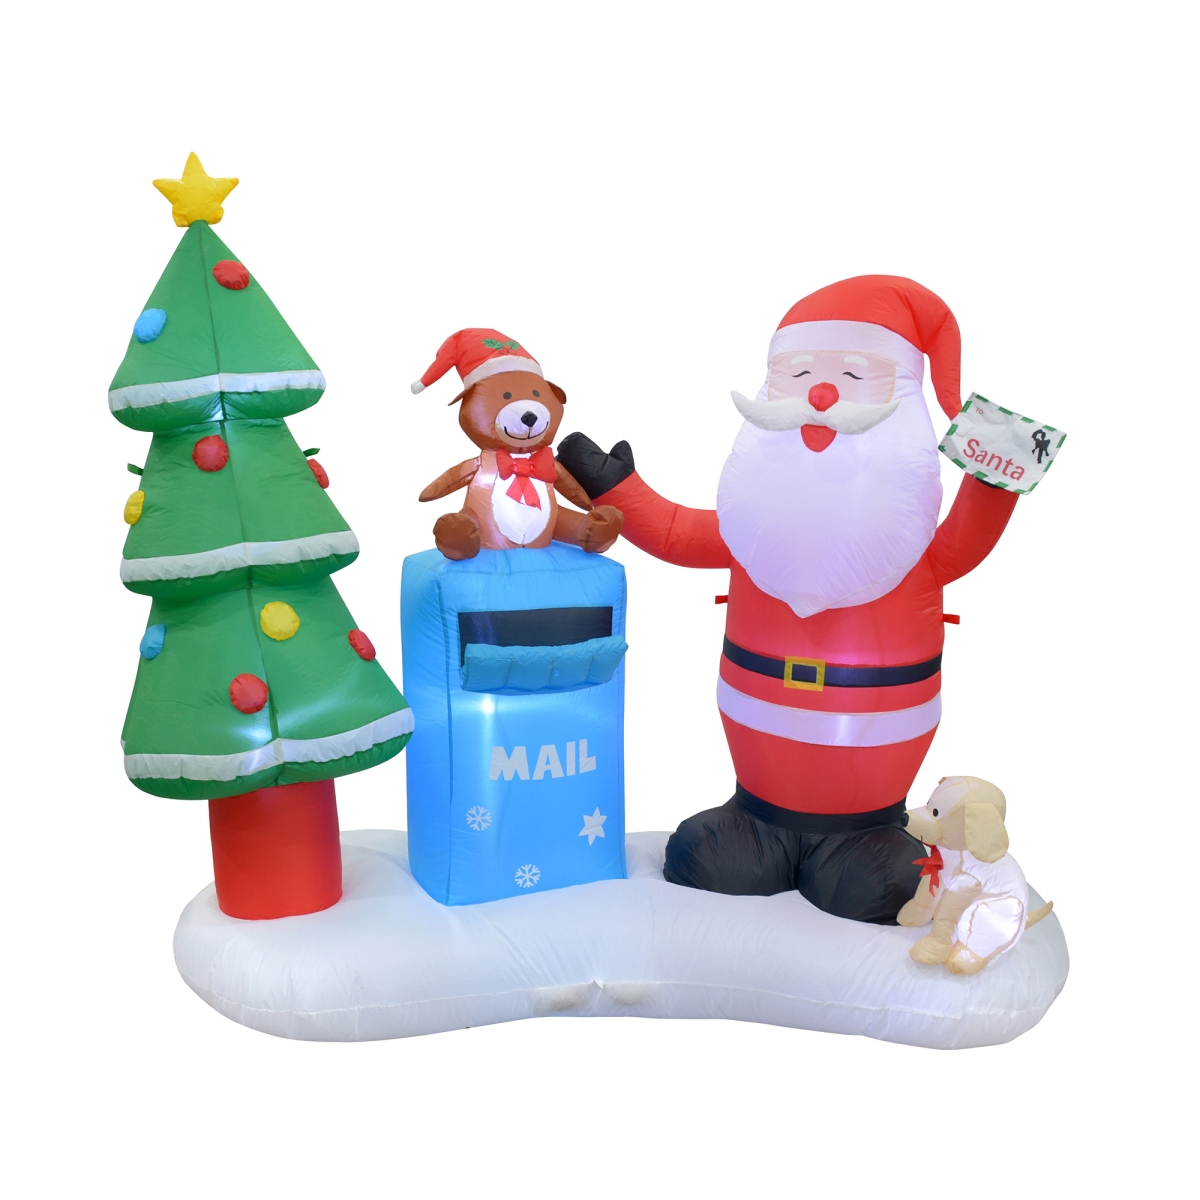 Picture of Jeco CHD-OD074 6.5 ft. Inflatable Santa with Mailbox for Christmas Decoration